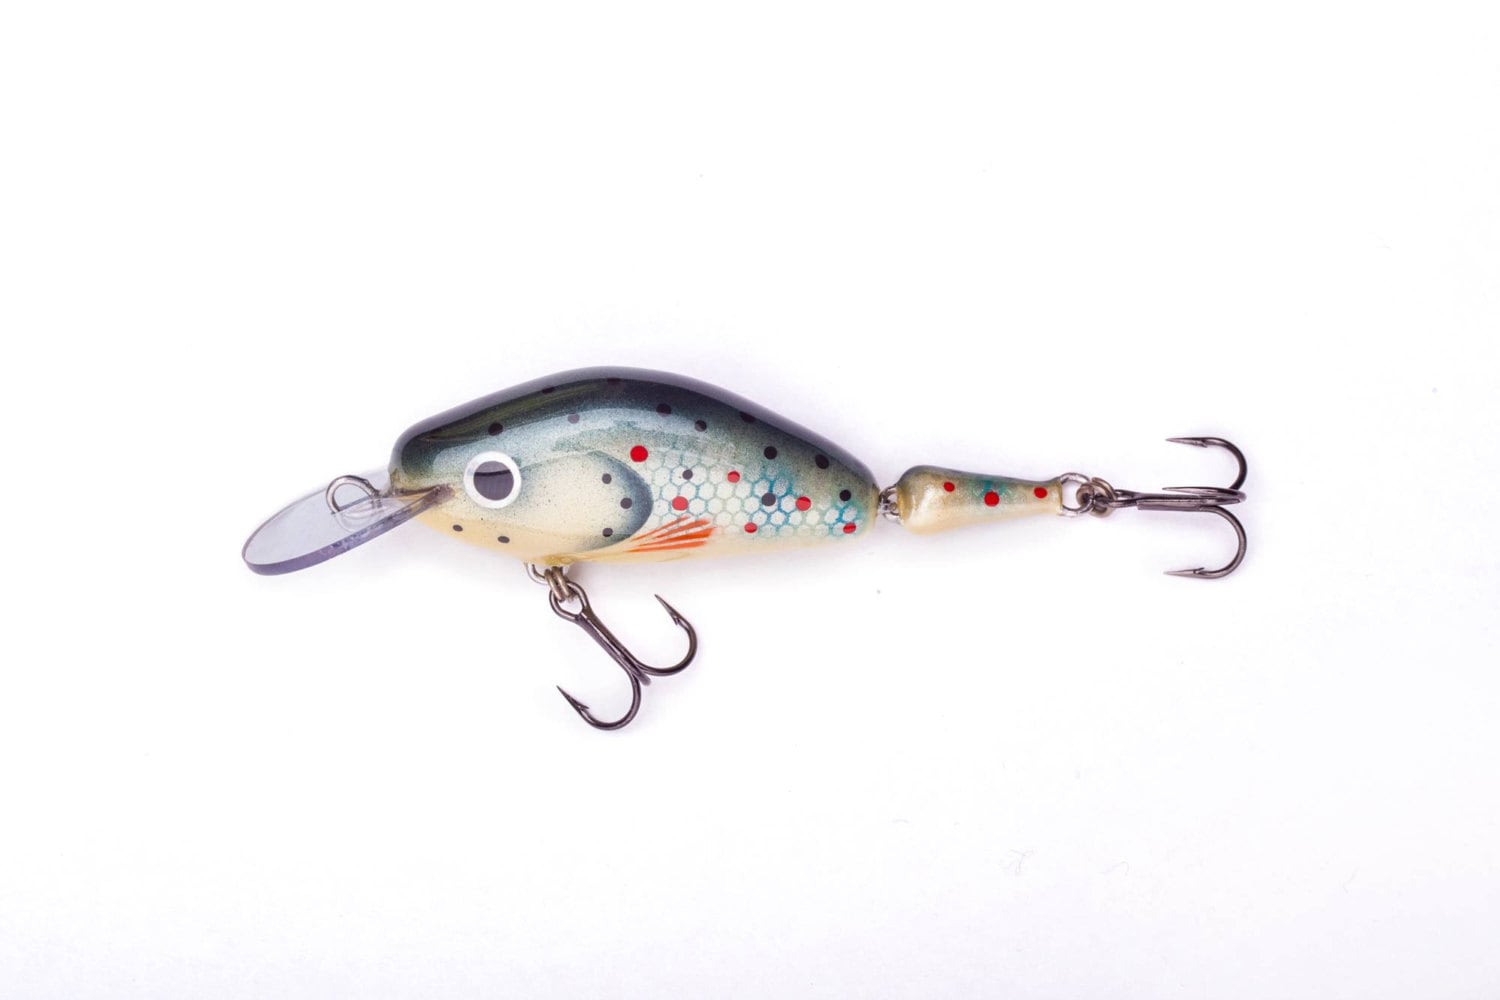 Buy Custom Fishing Lure Brown Trout 4.5cm 2 Inches Online in India